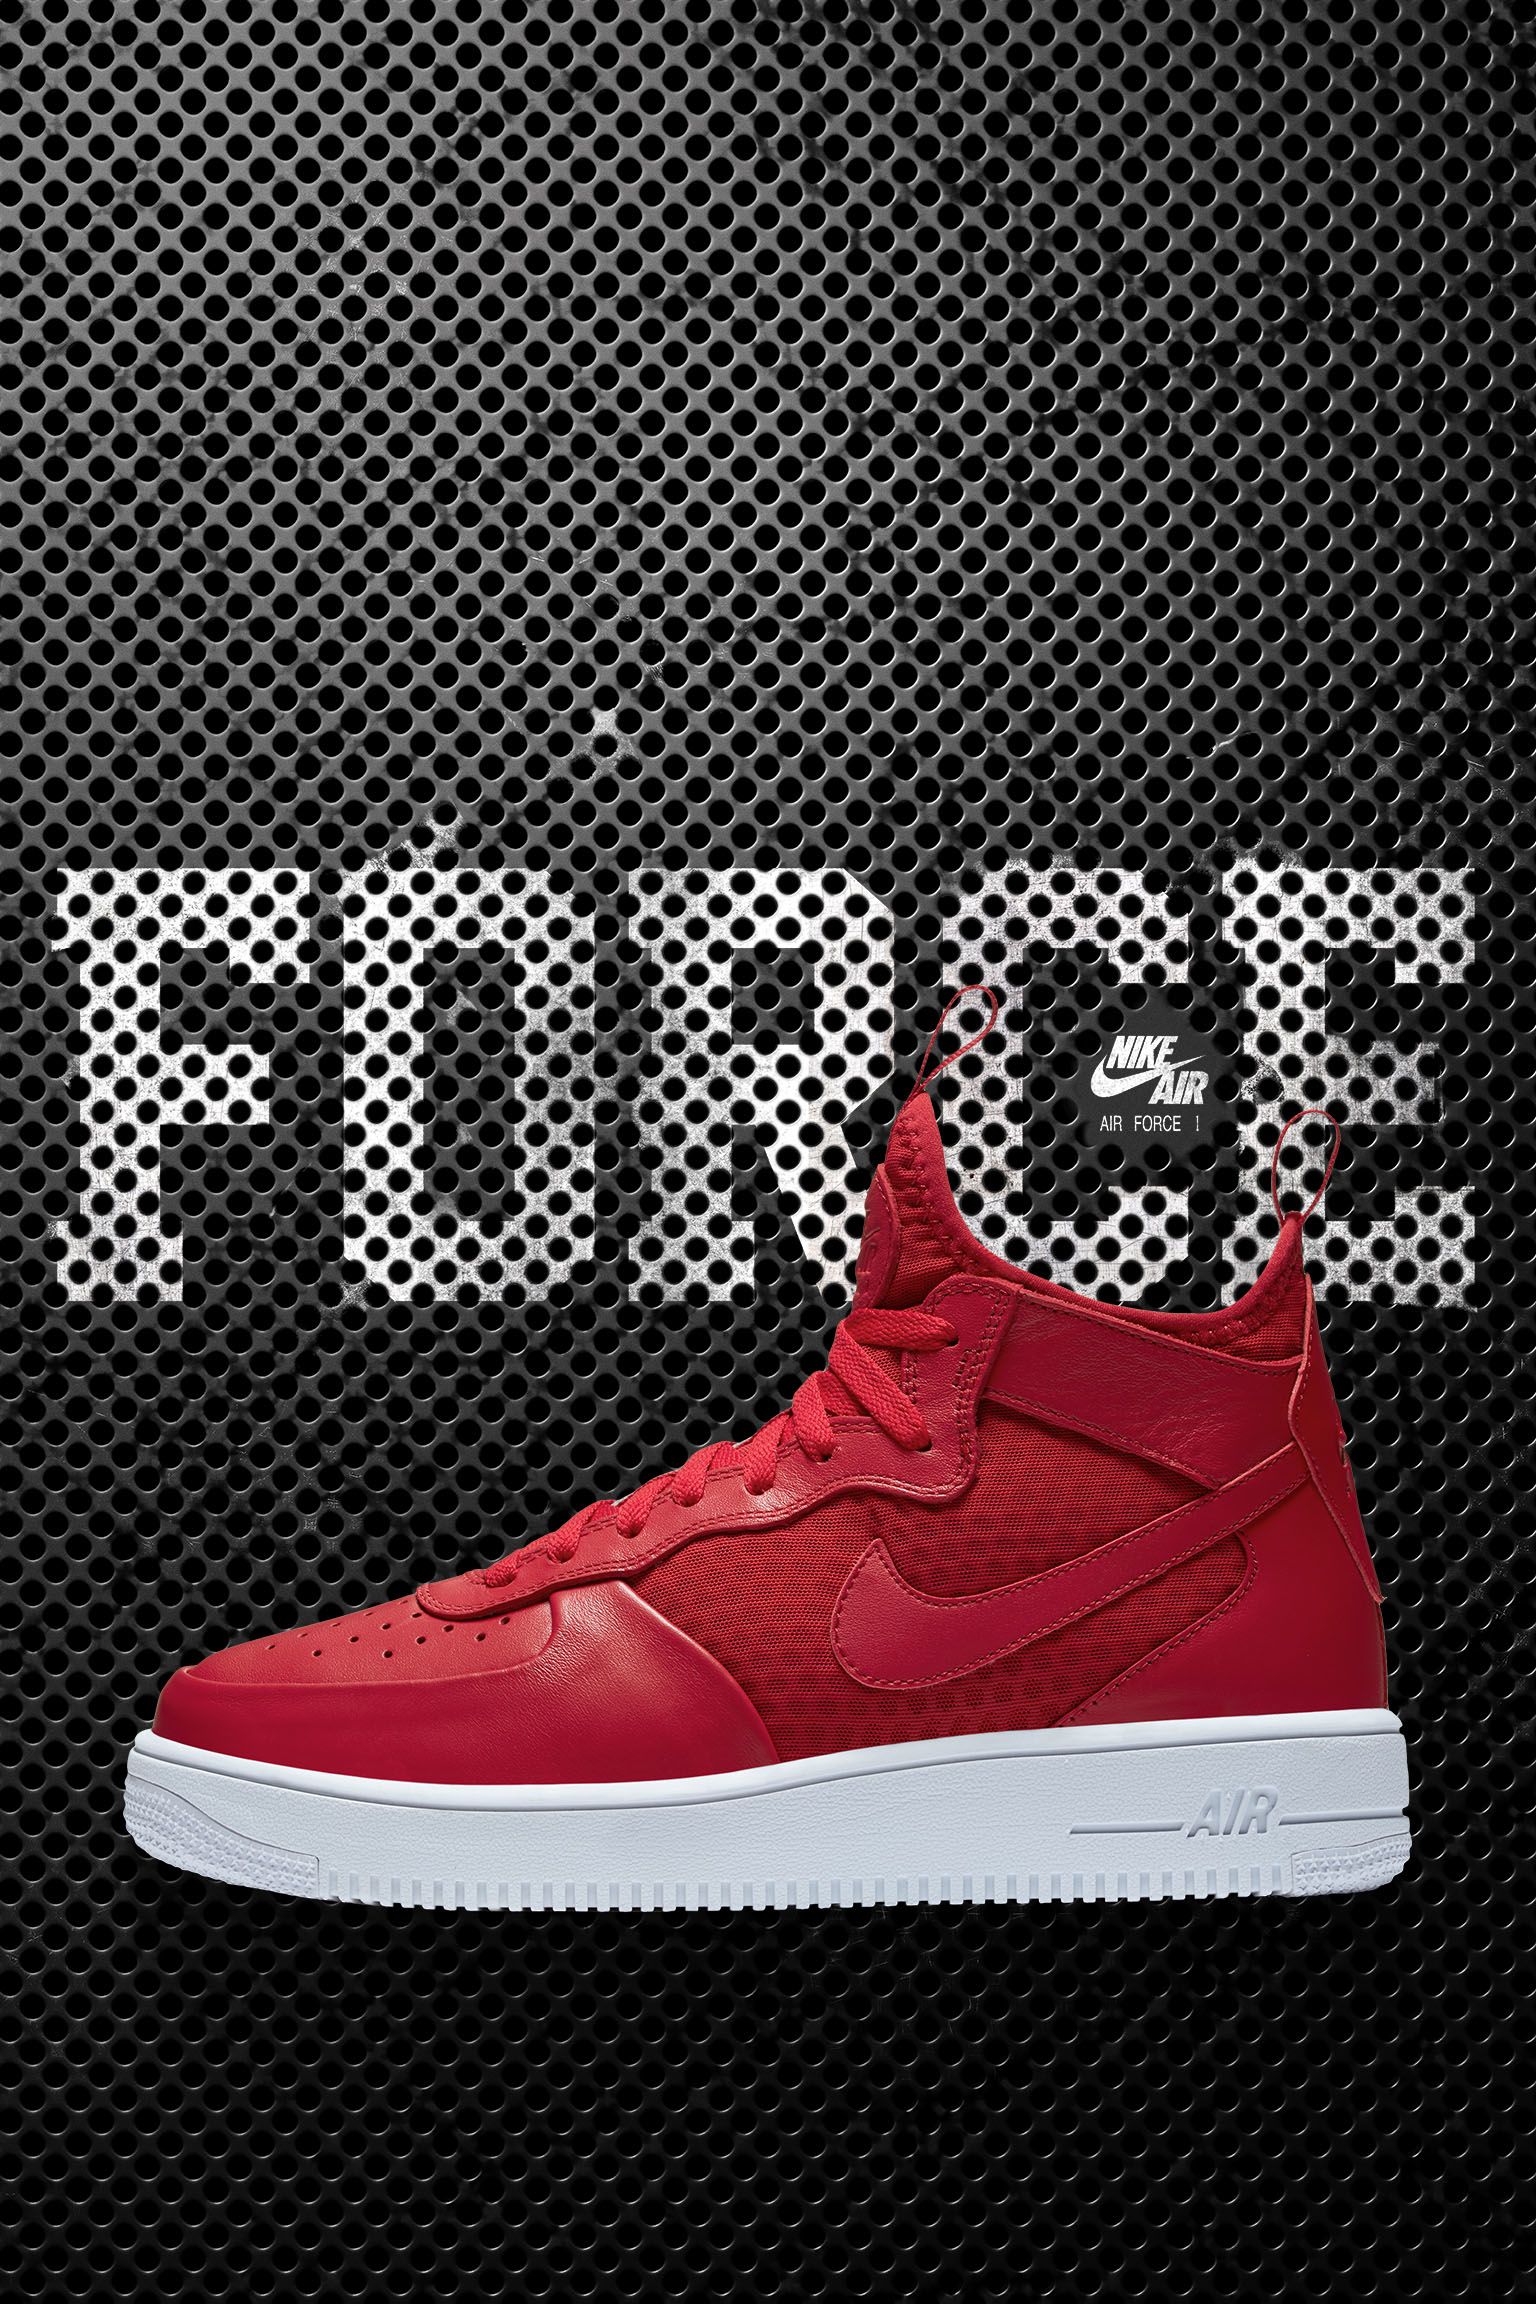 red grey air force 1